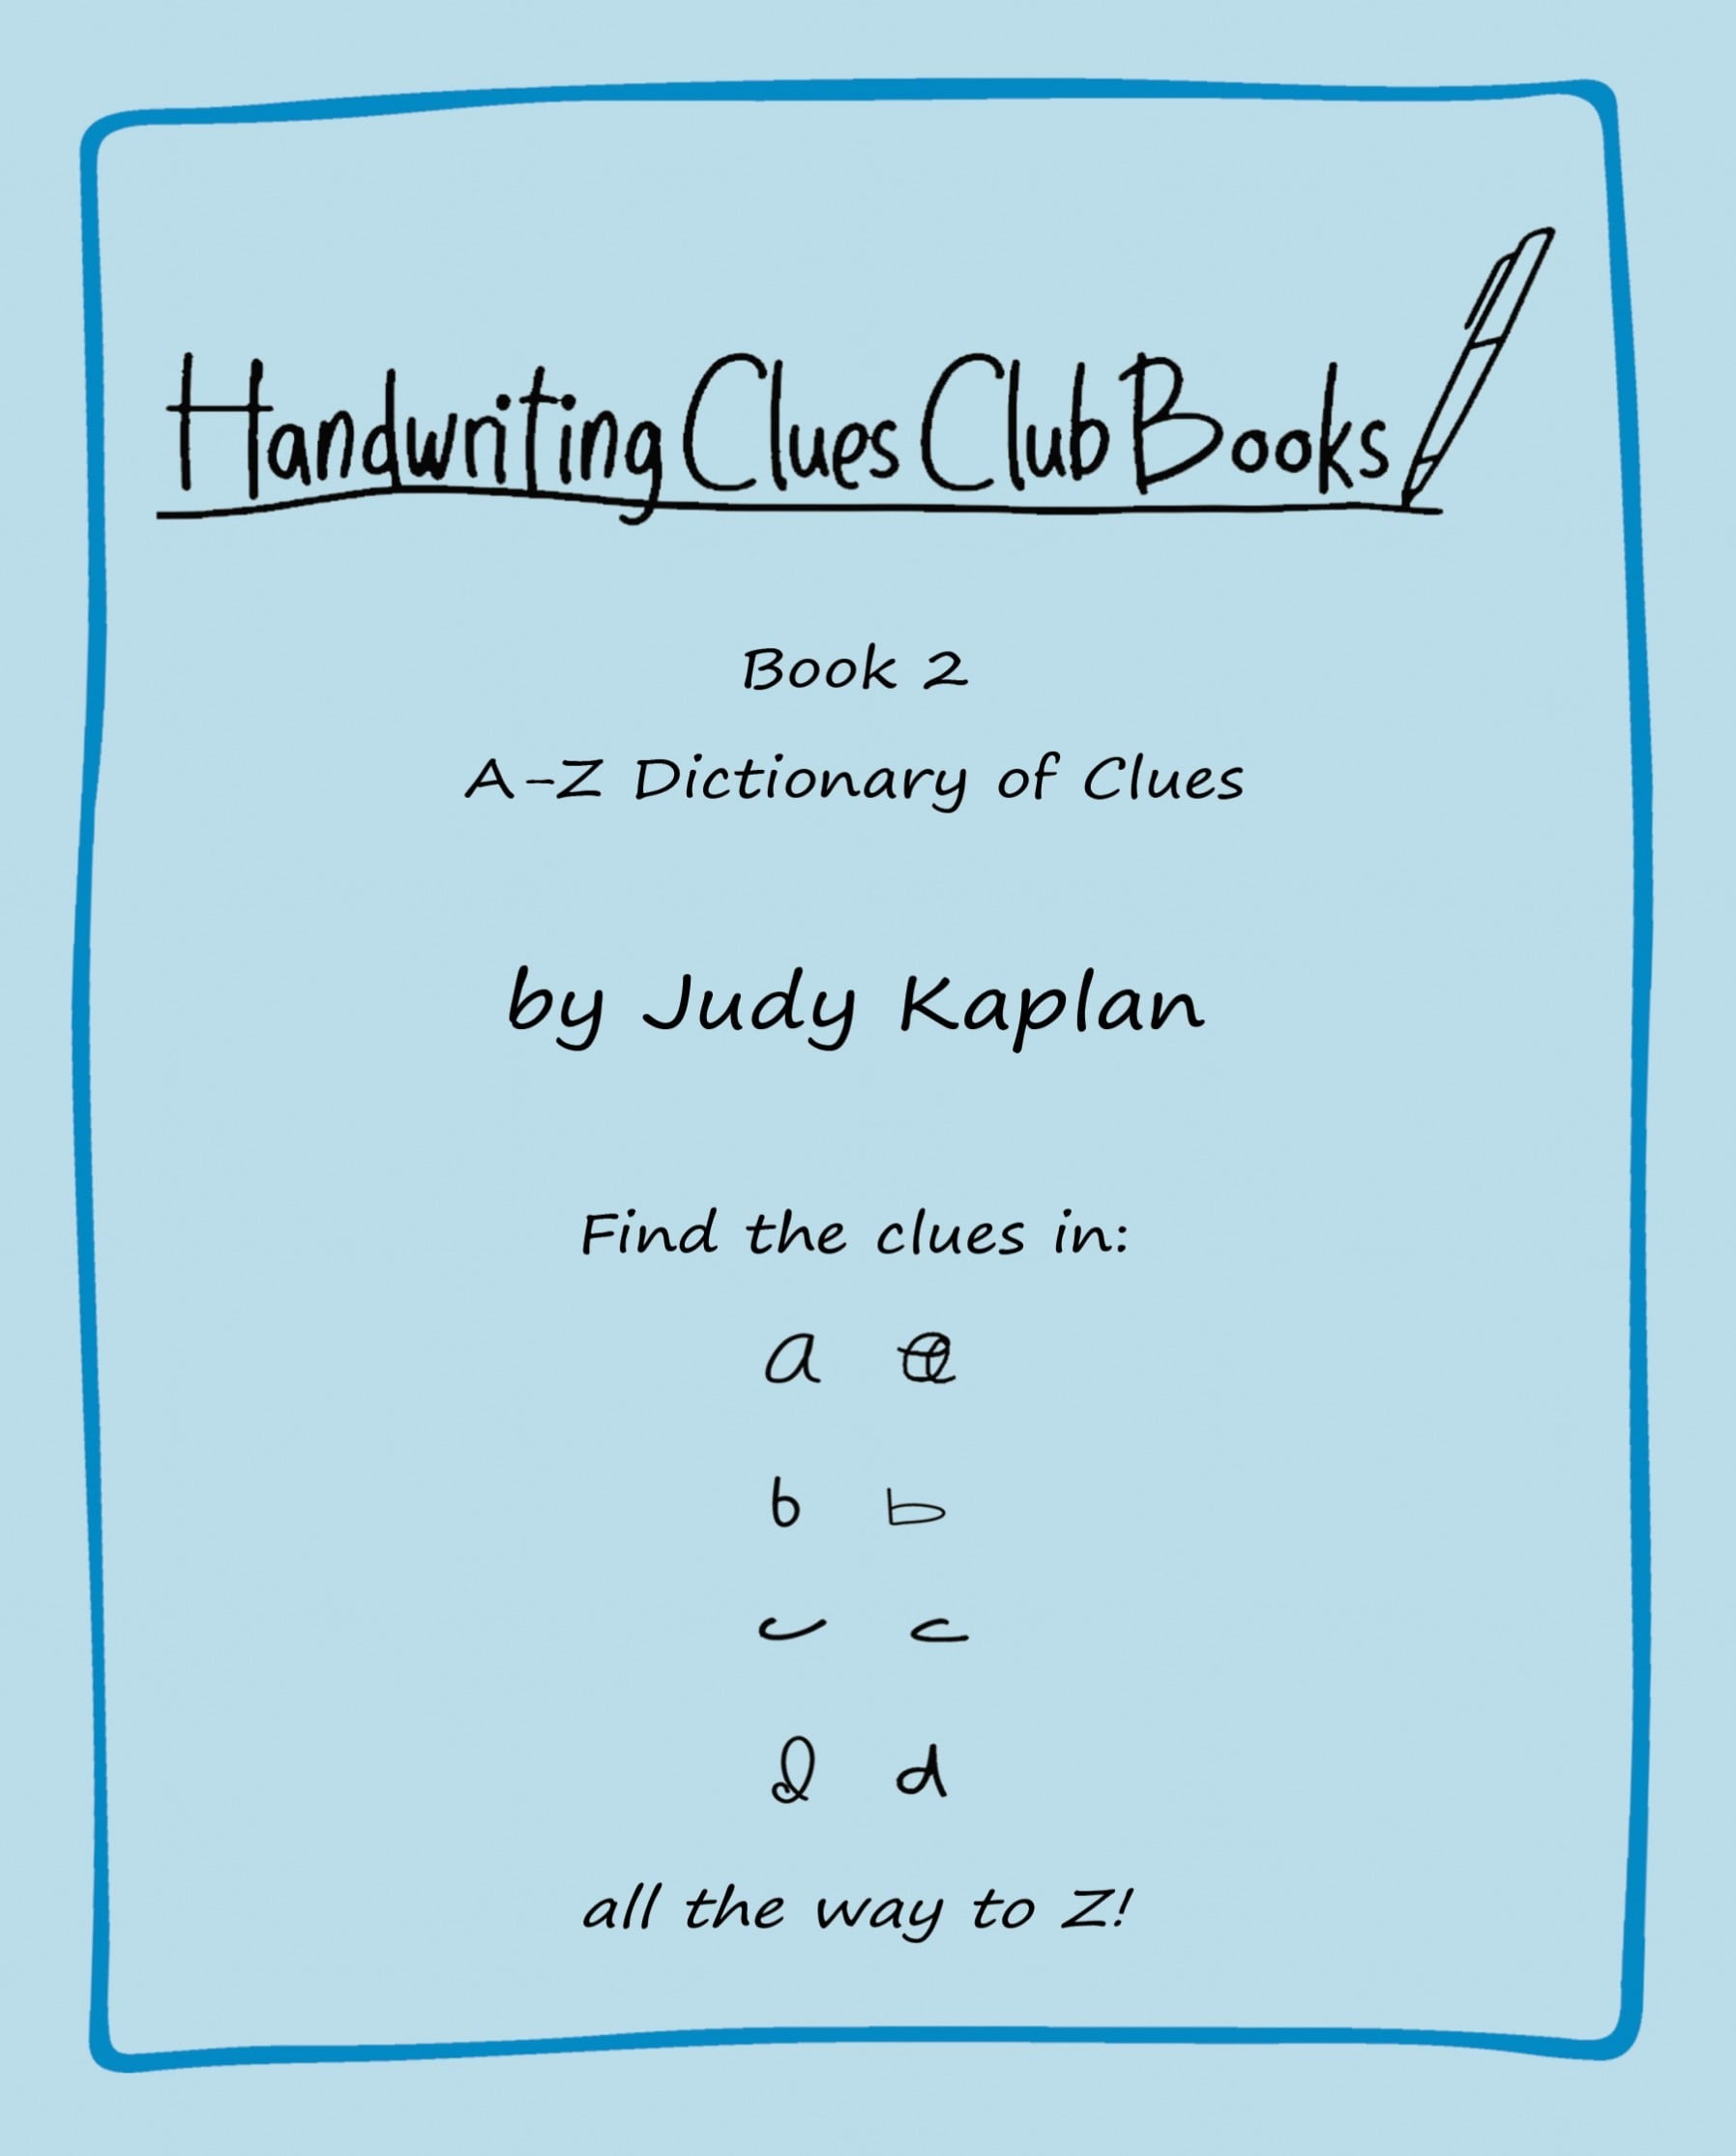 A-Z Dictionary of Clues